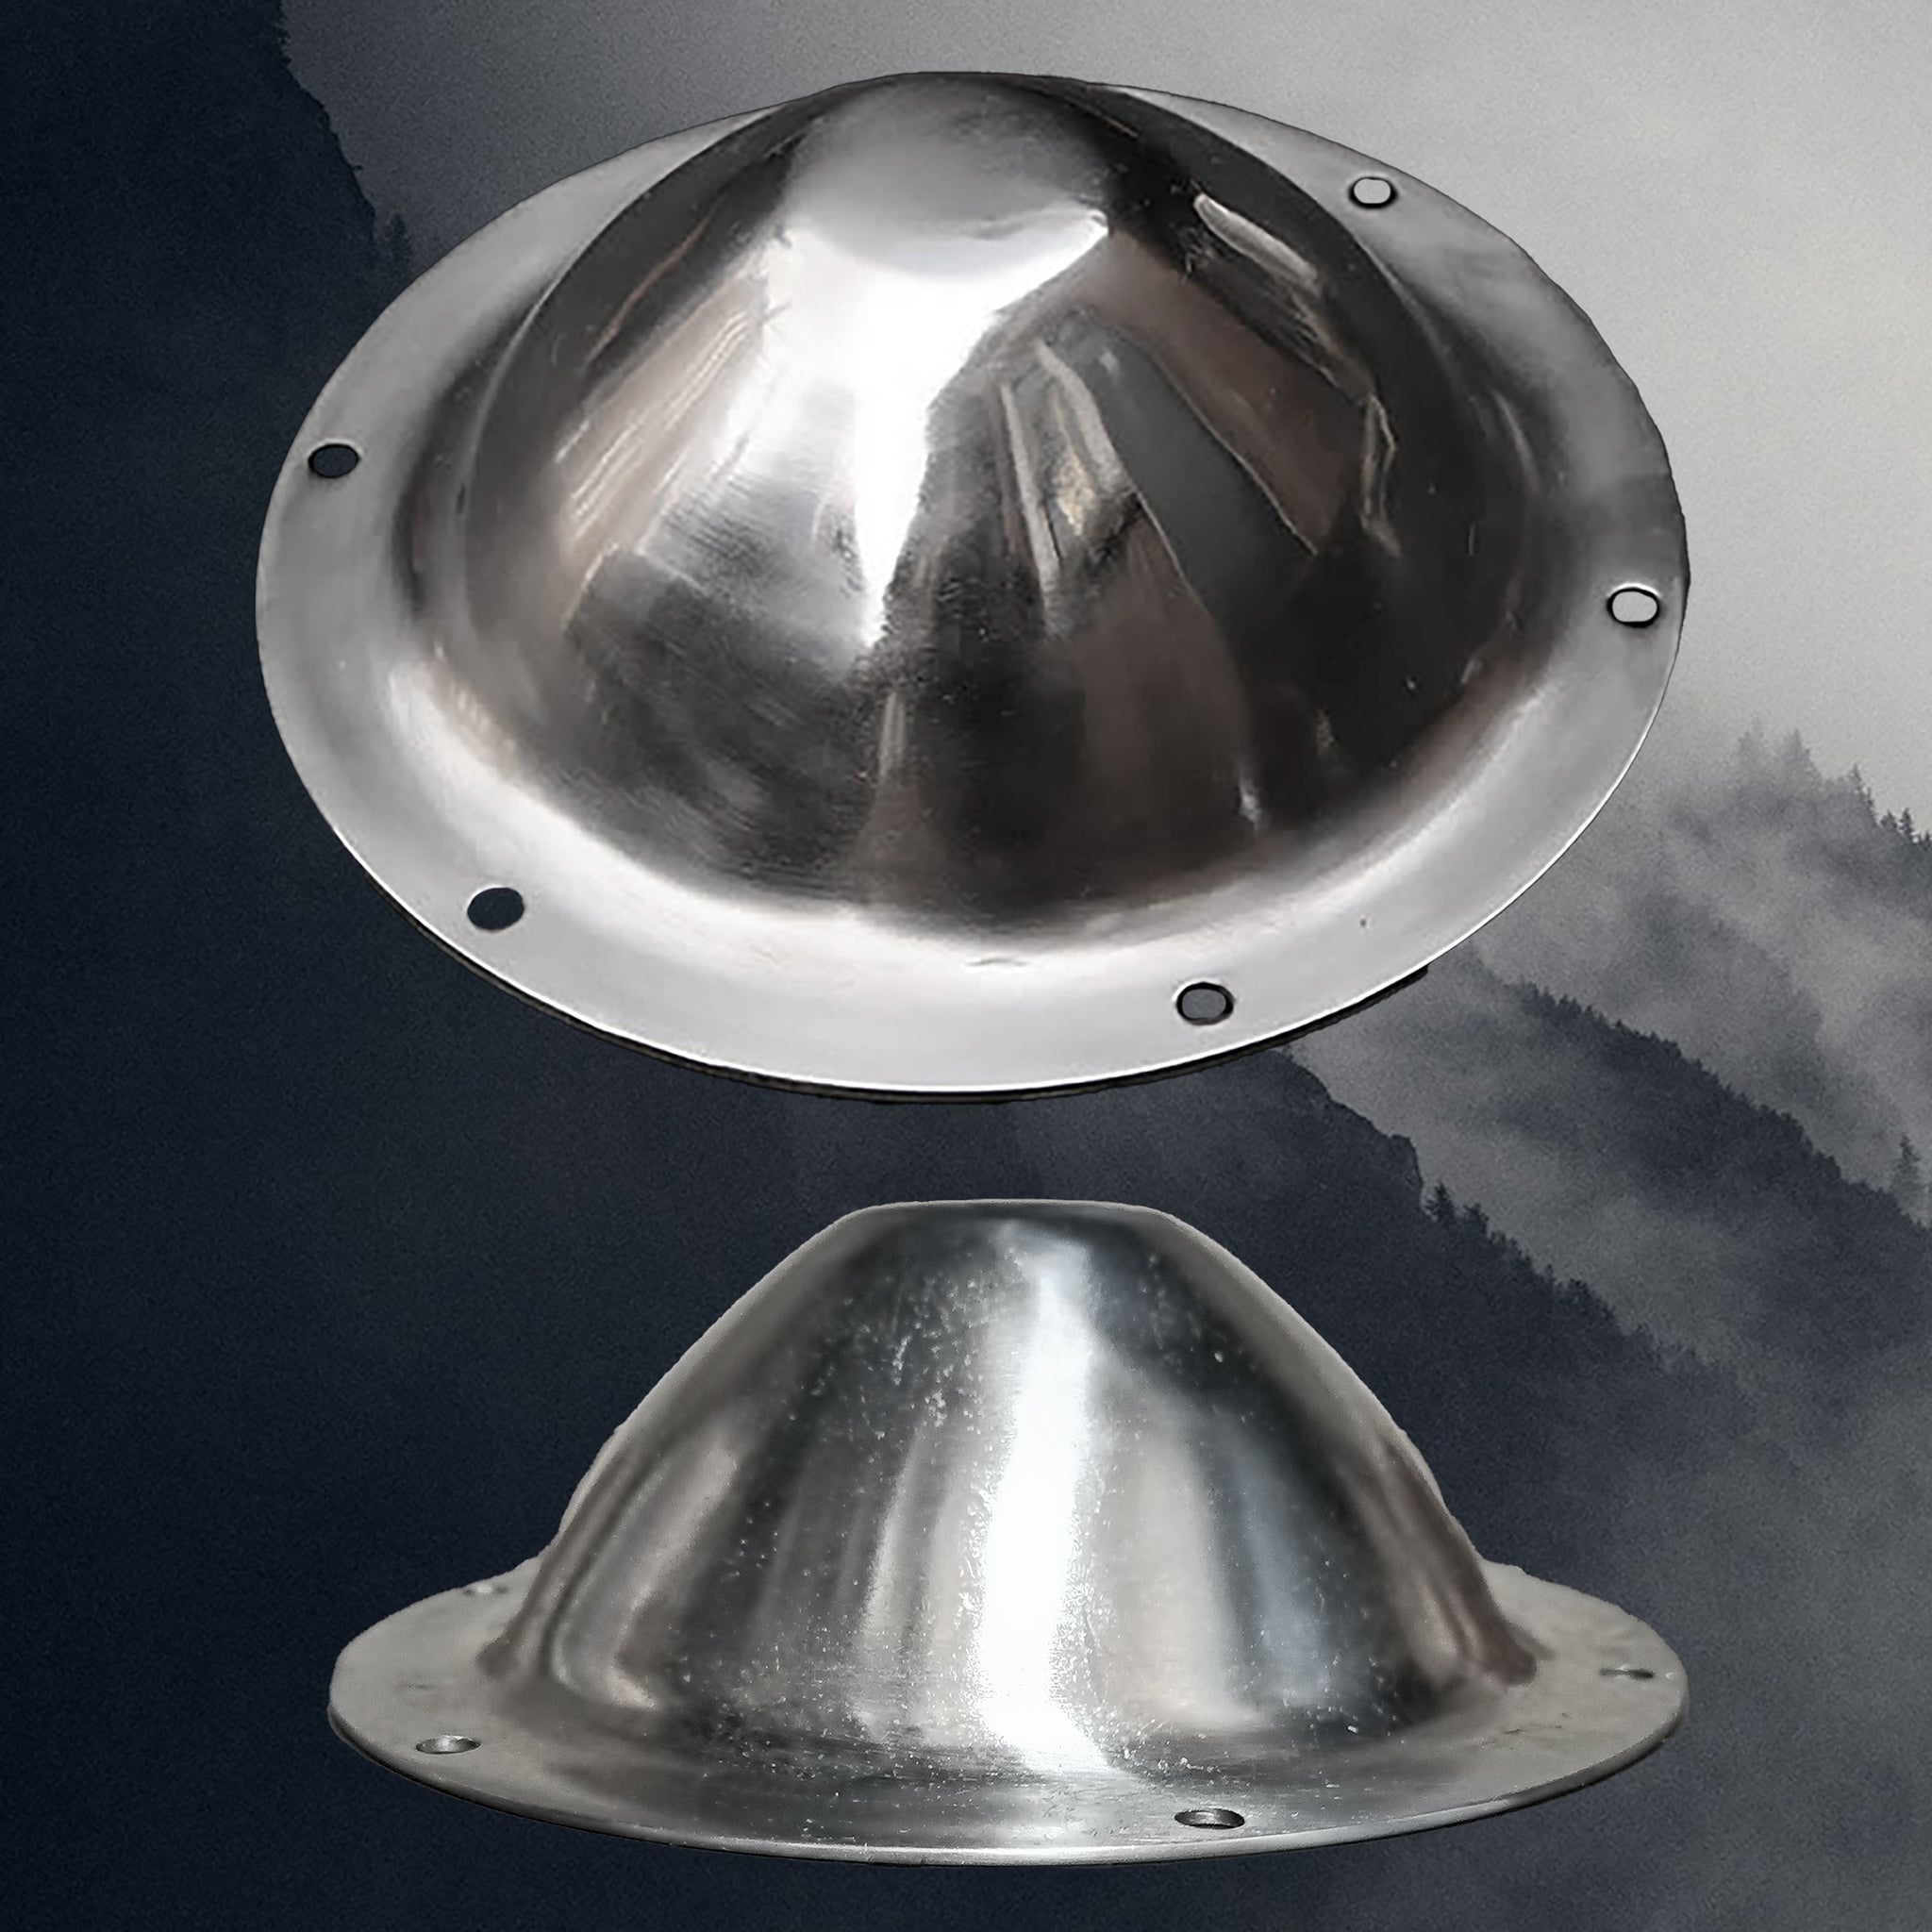 Conical Spun Viking Shield Boss with Rivet Holes - Different Angles on Misty Hillside Background